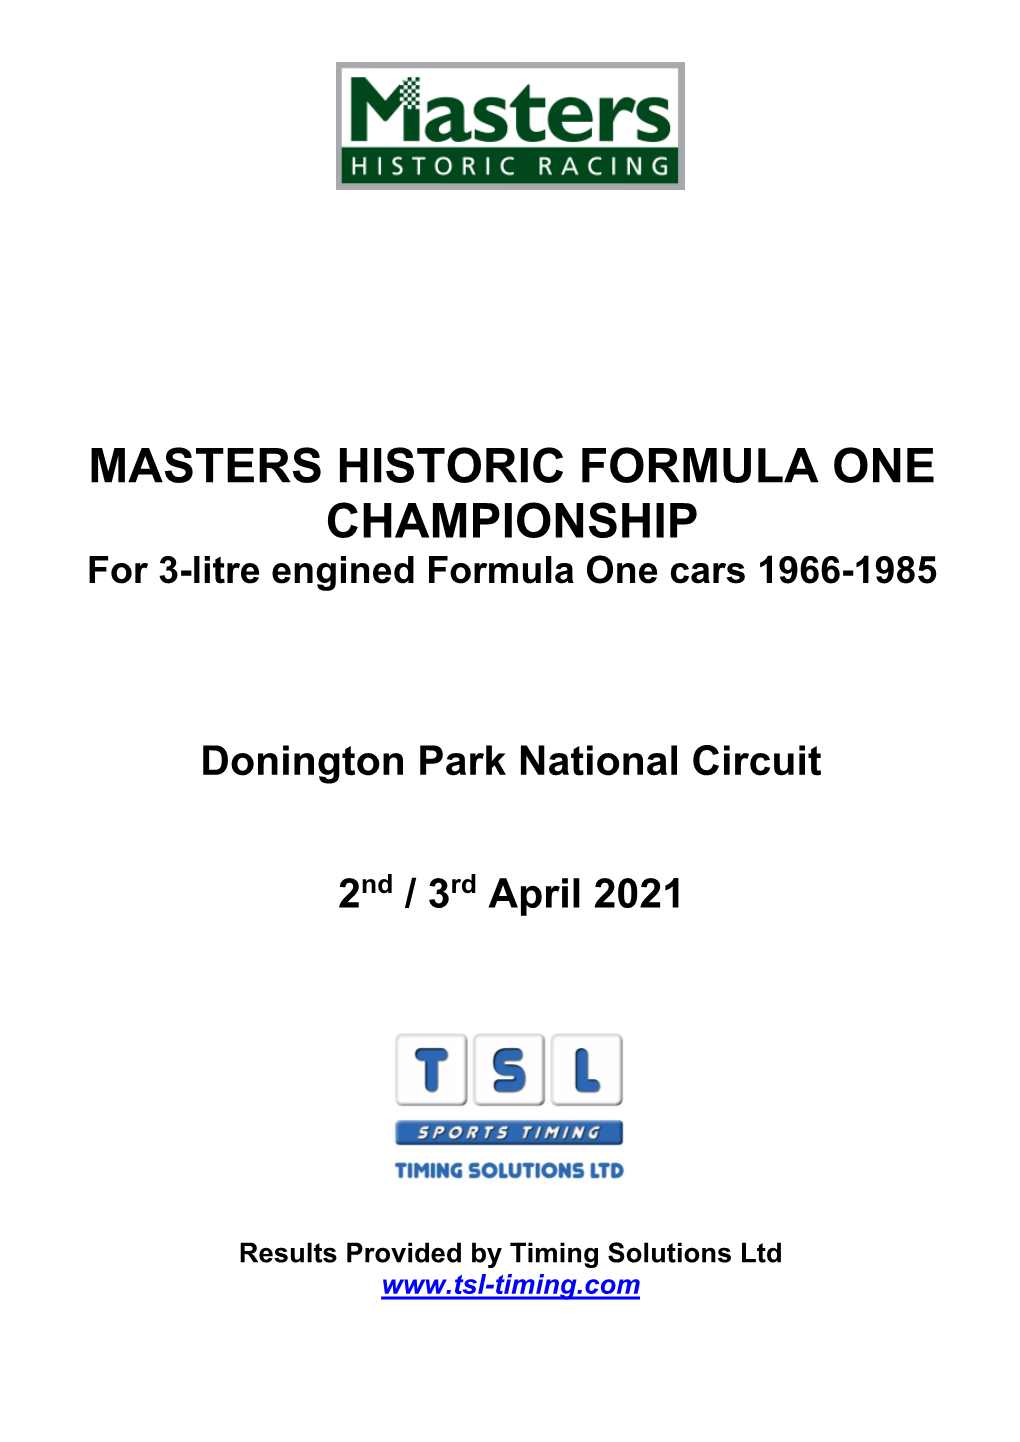 MASTERS HISTORIC FORMULA ONE CHAMPIONSHIP for 3-Litre Engined Formula One Cars 1966-1985